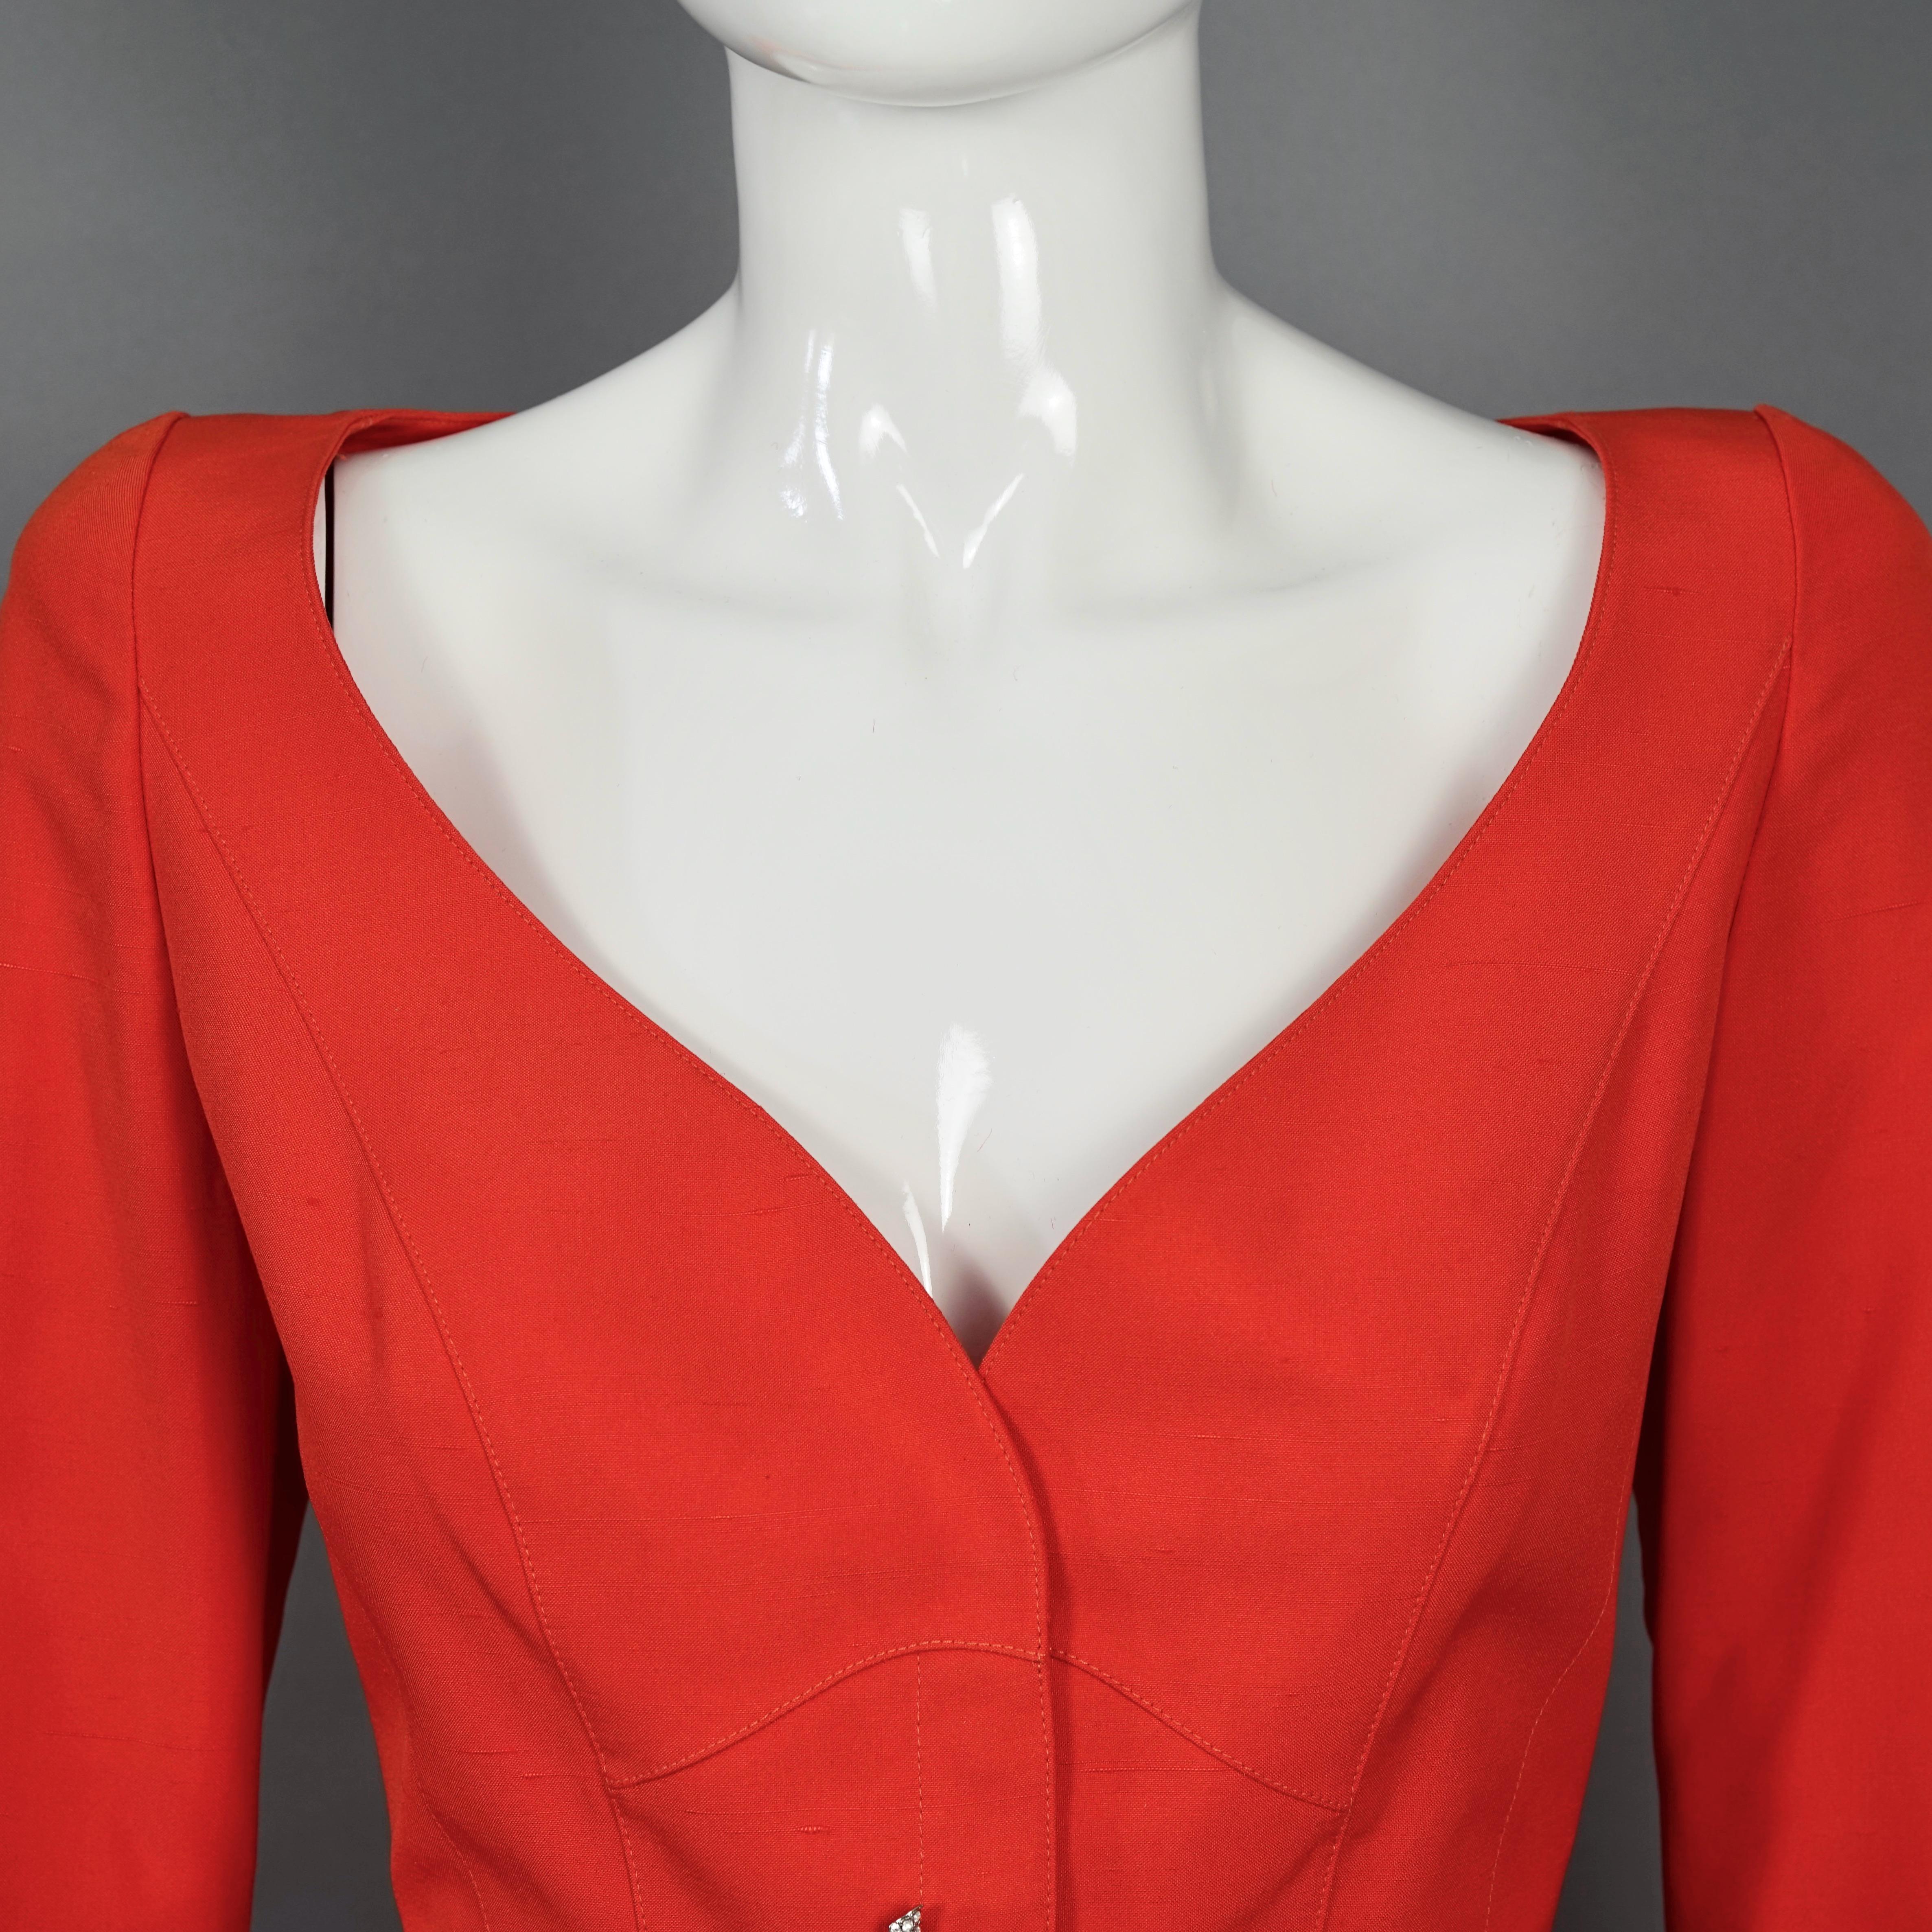 Vintage THIERRY MUGLER Jeweled Coral Button Orange Jacket Skirt Suit In Excellent Condition For Sale In Kingersheim, Alsace